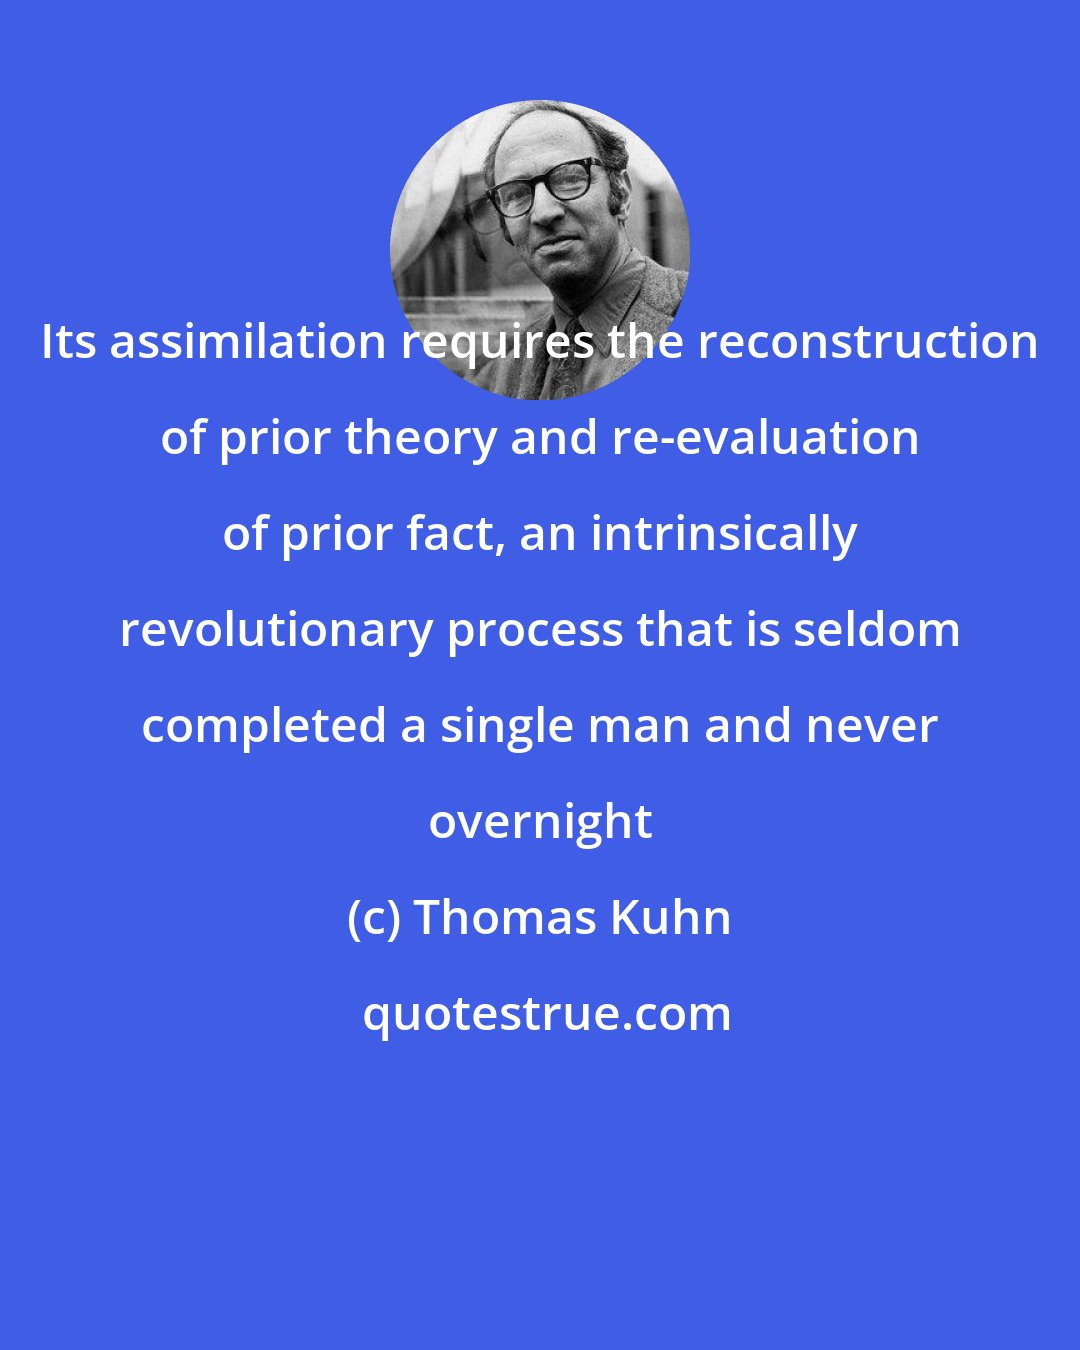 Thomas Kuhn: Its assimilation requires the reconstruction of prior theory and re-evaluation of prior fact, an intrinsically revolutionary process that is seldom completed a single man and never overnight